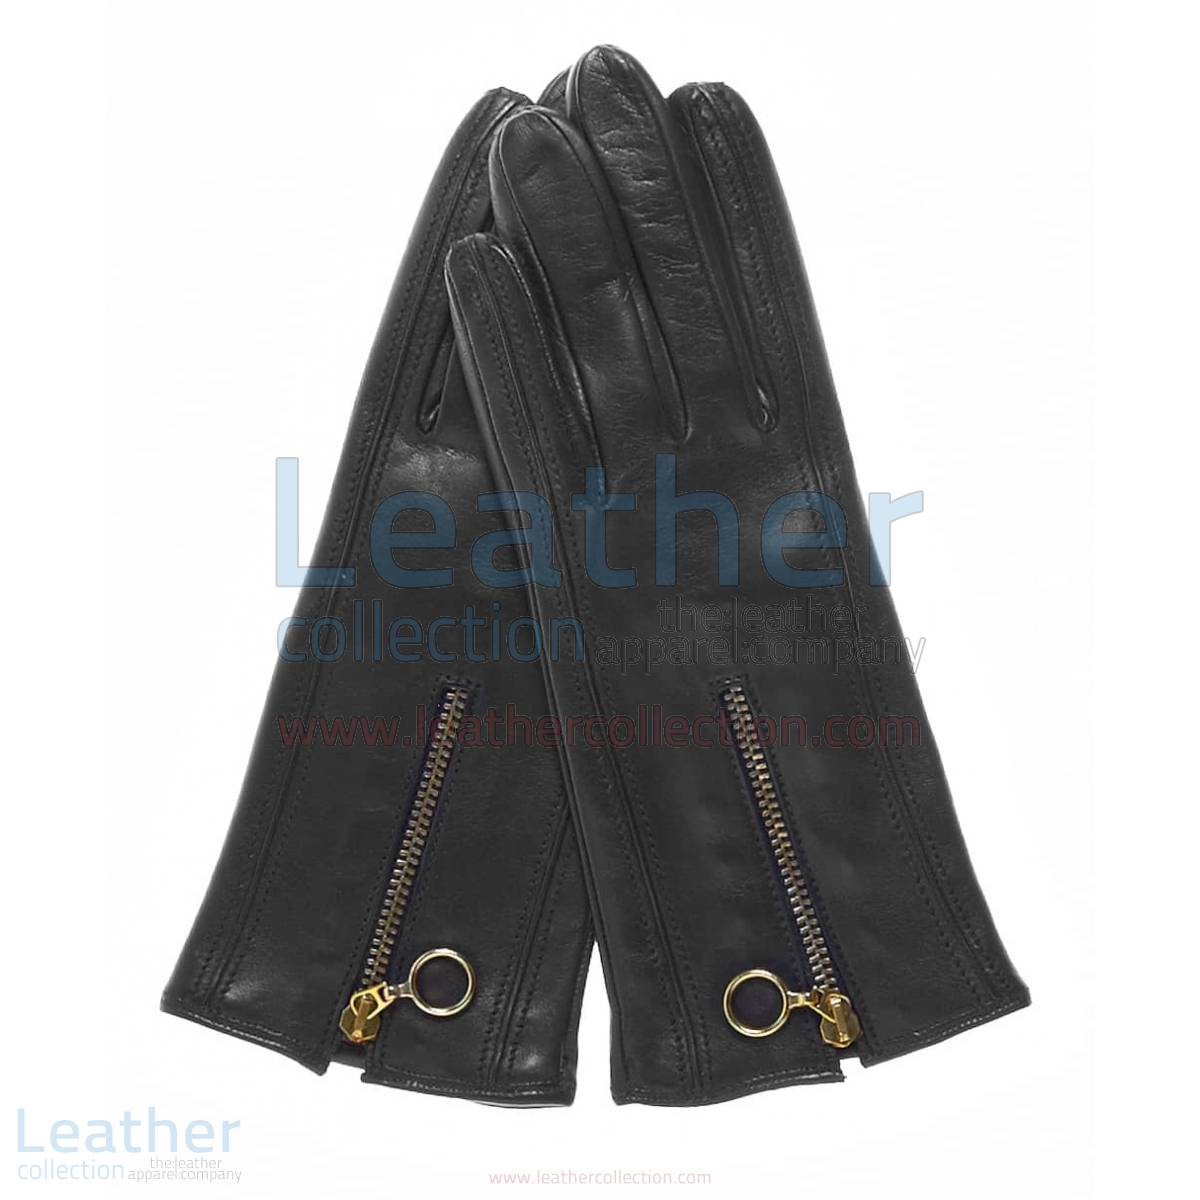 Cashmere Lined Gloves With Zippers